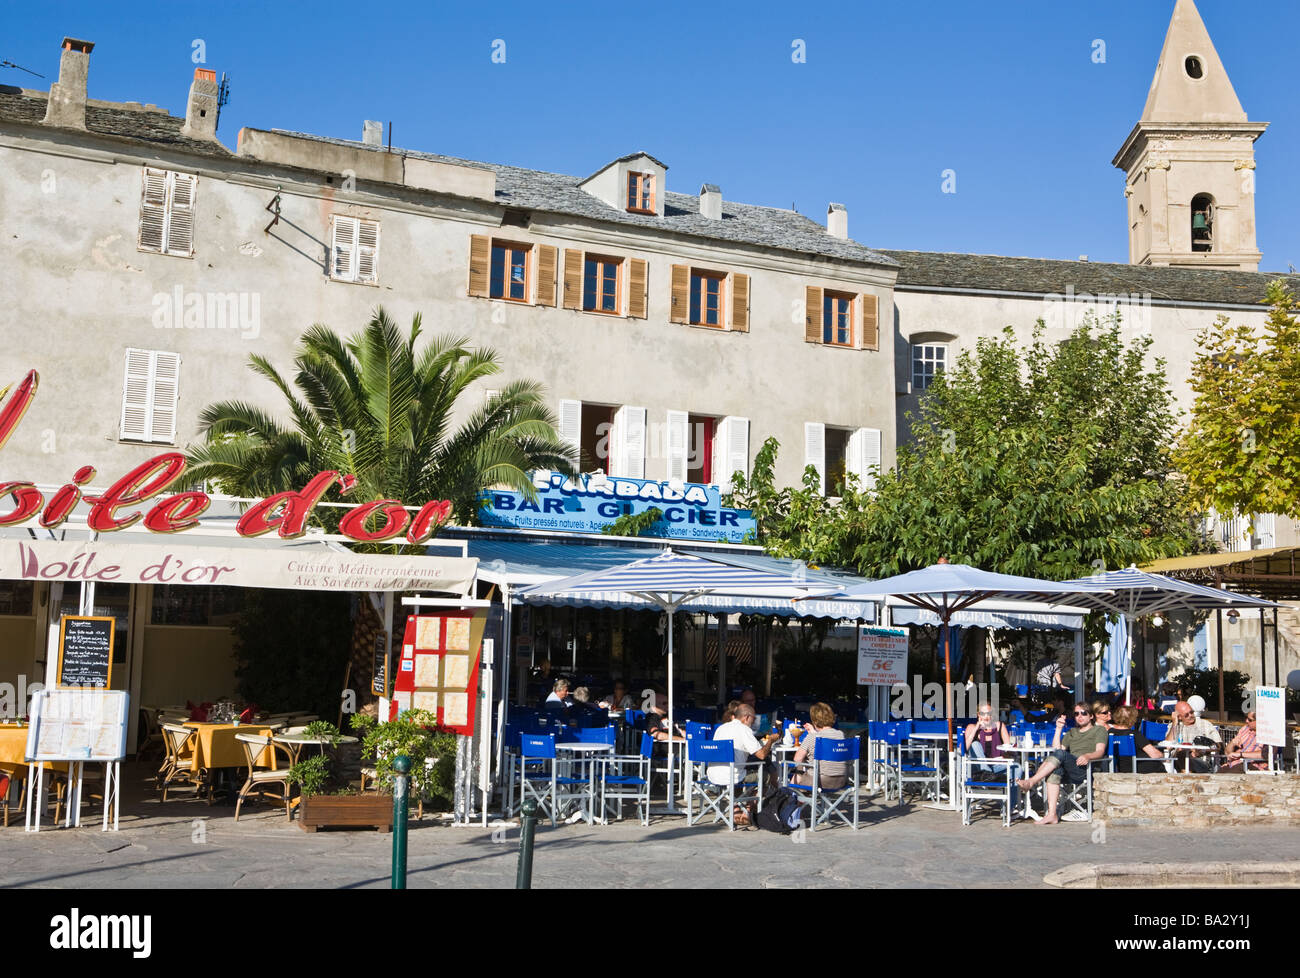 Alfresco dining in St Florent Corsica France Stock Photo